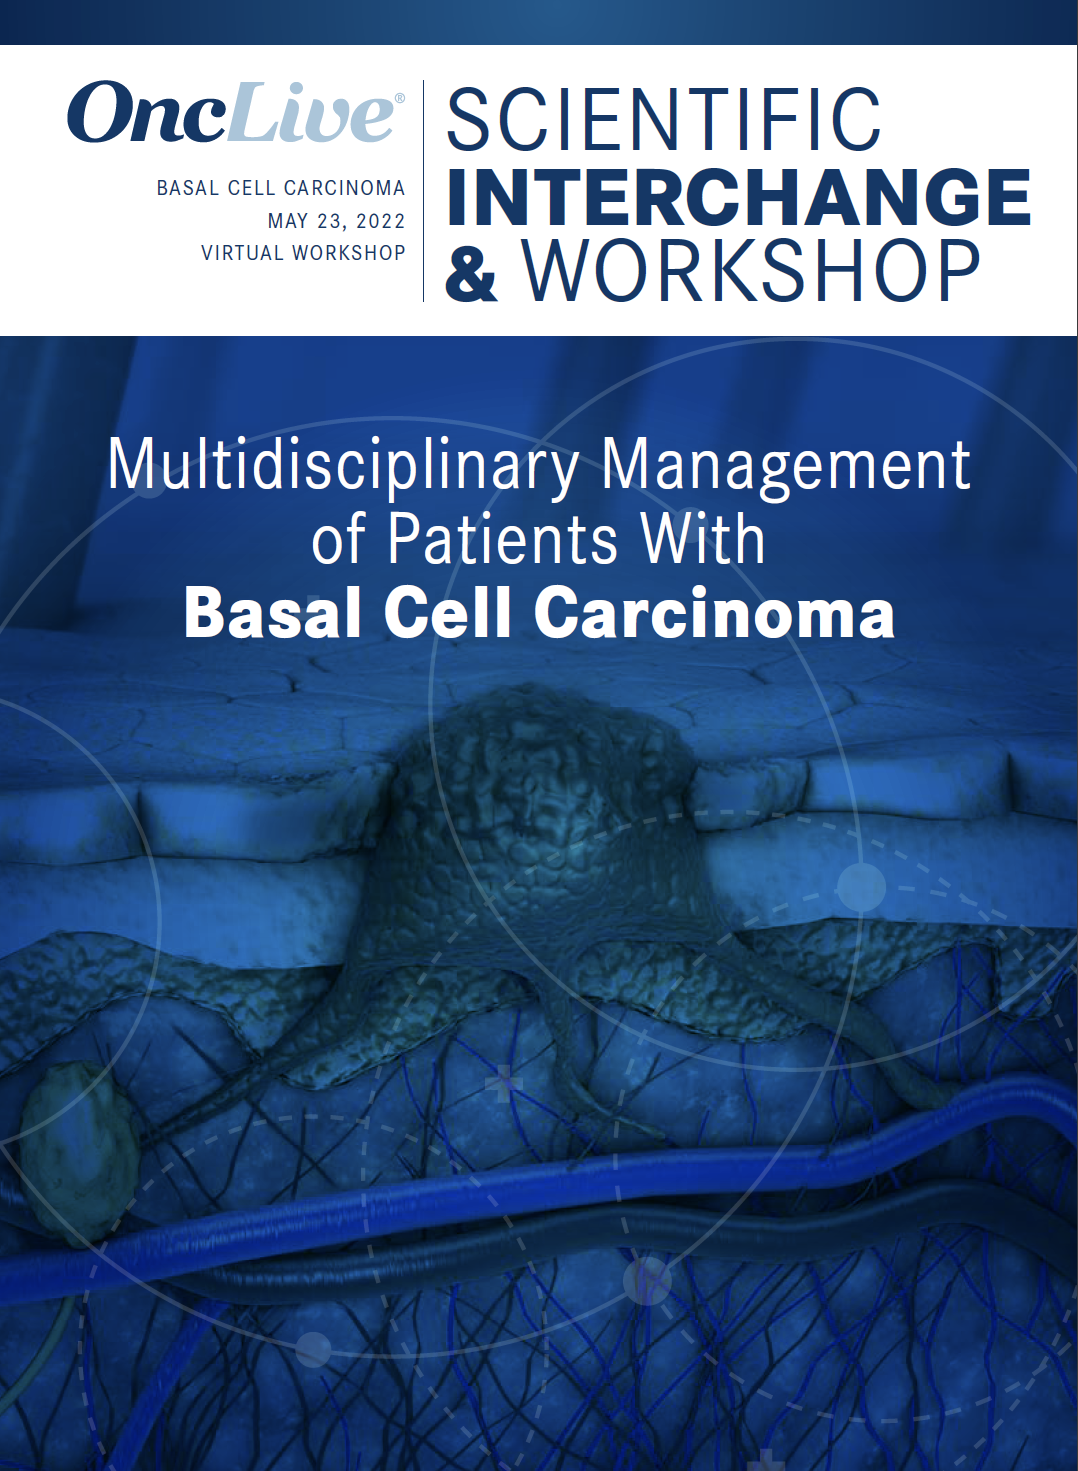 Multidisciplinary Management of Patients with Basal Cell Carcinoma